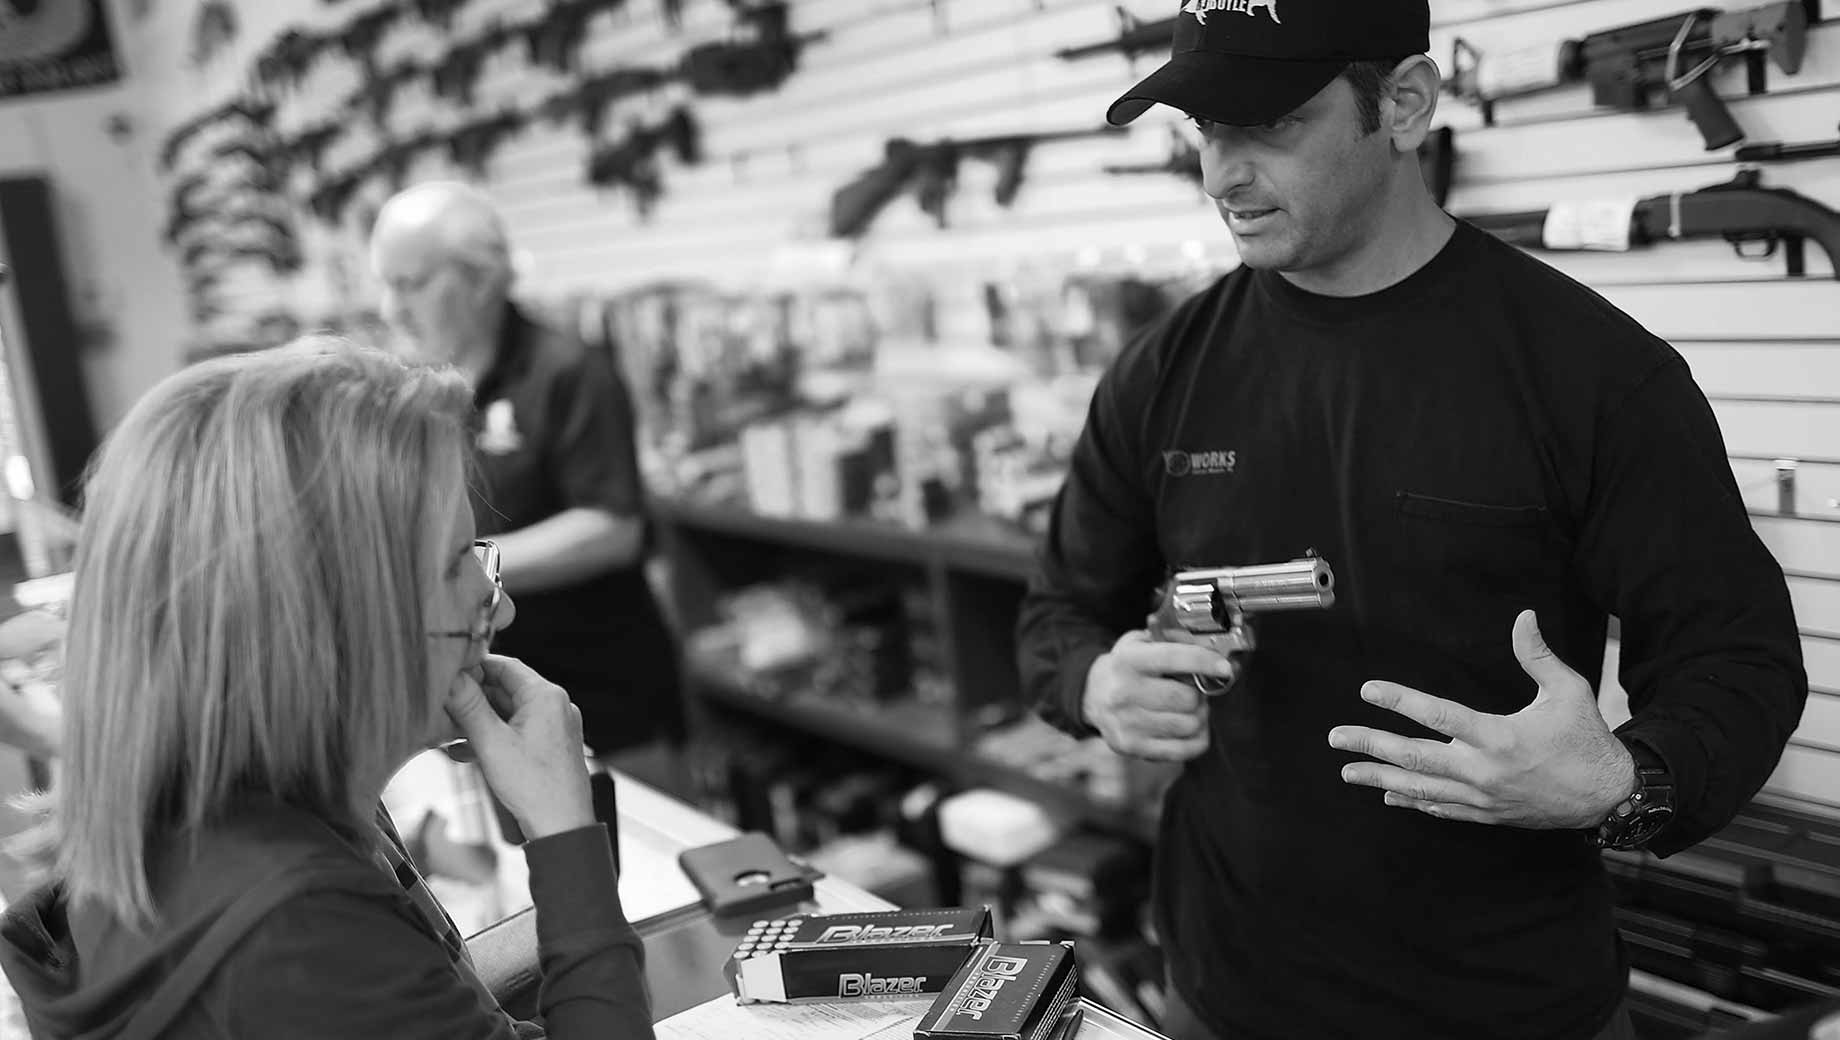 Gallup: 6 in 10 Americans Want Stricter Gun Control Laws